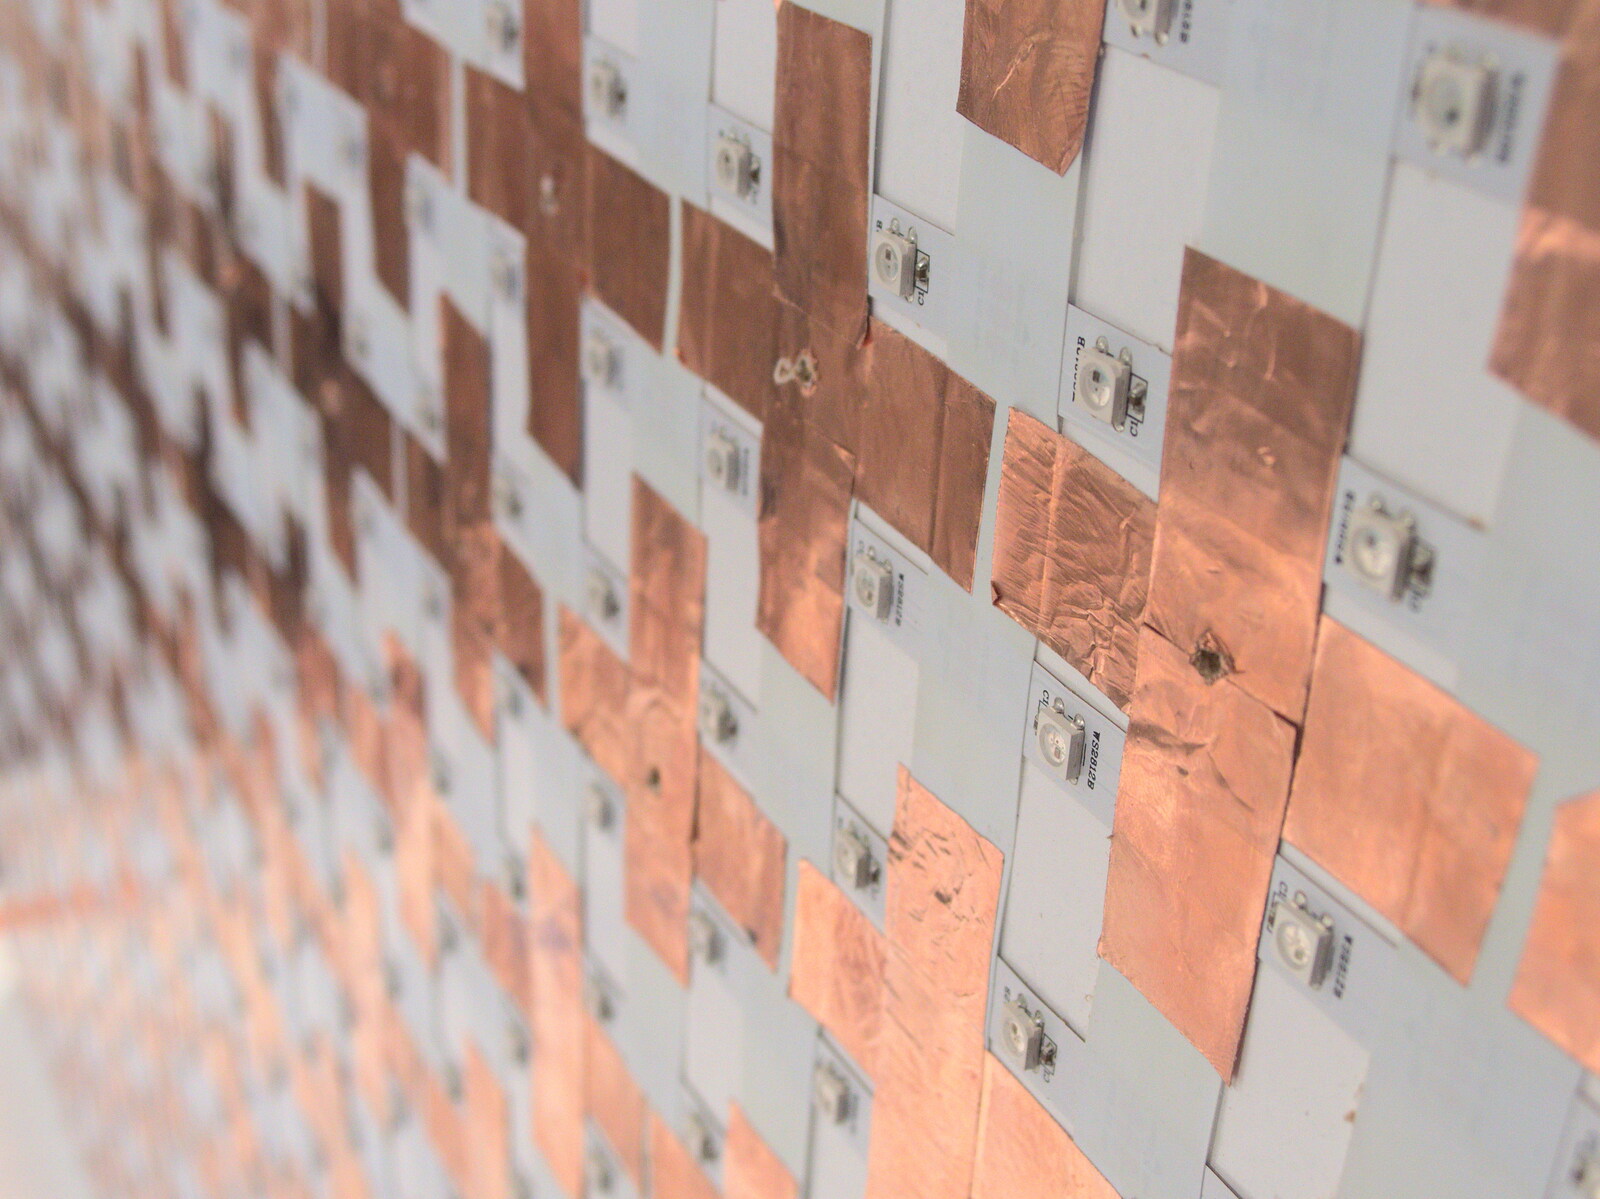 A close-up of copper tape from Innovation Week and a Walk Around the South Bank, Southwark - 8th December 2016